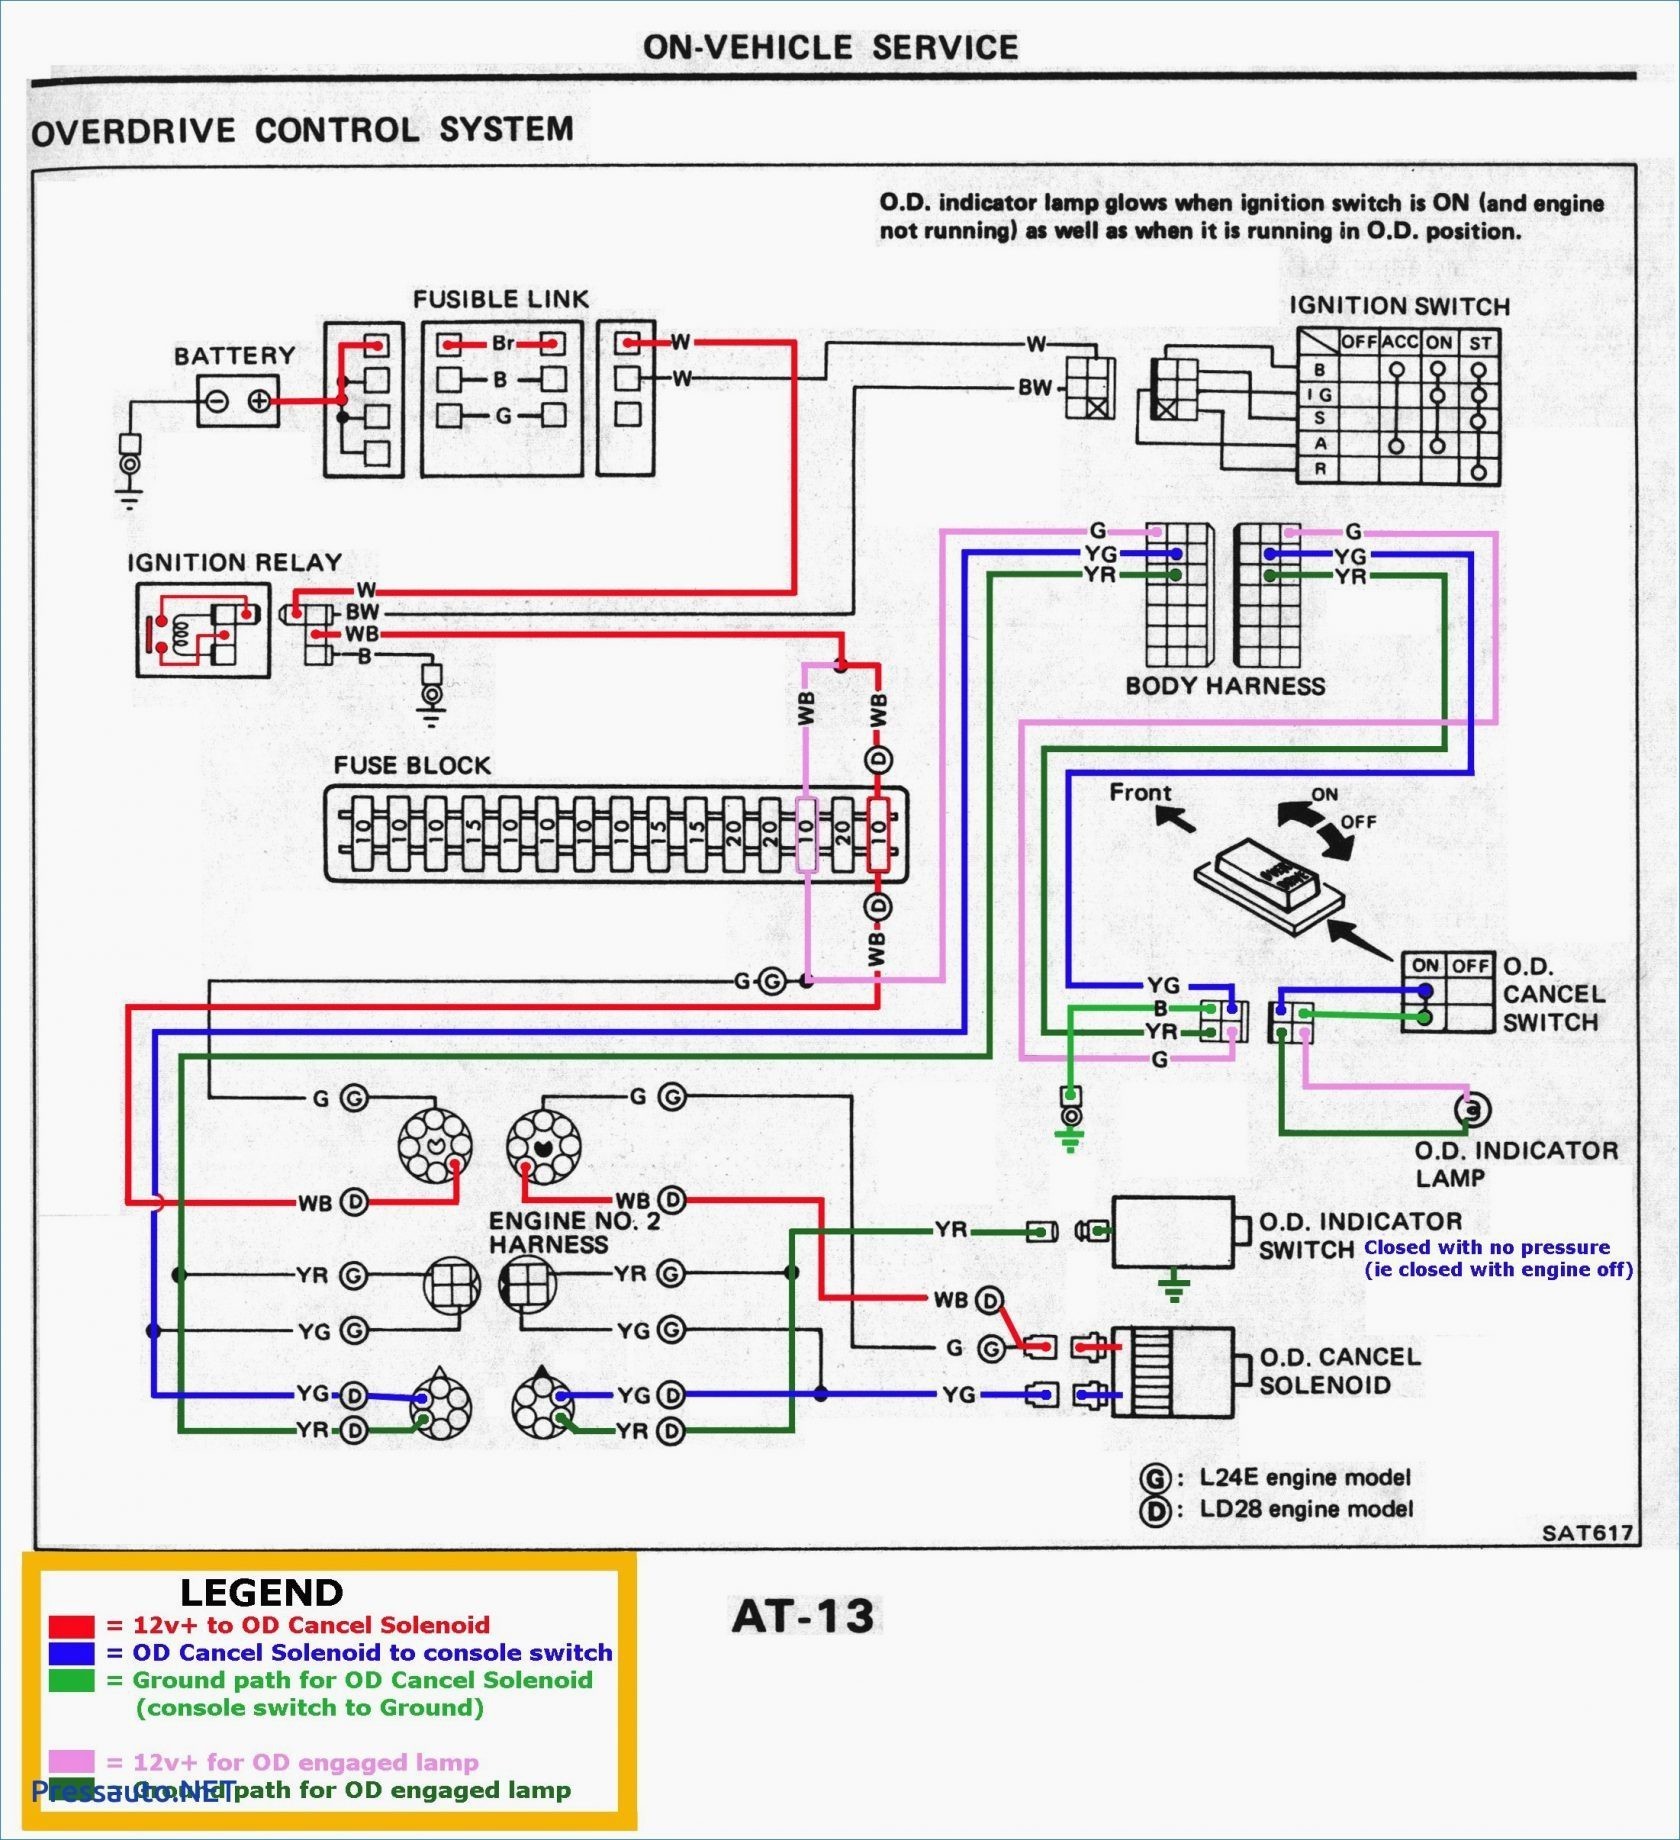 Diagram Of Car Stereo Wiring Car Wiring Harness Diagram Wiring Diagram toolbox Of Diagram Of Car Stereo Wiring